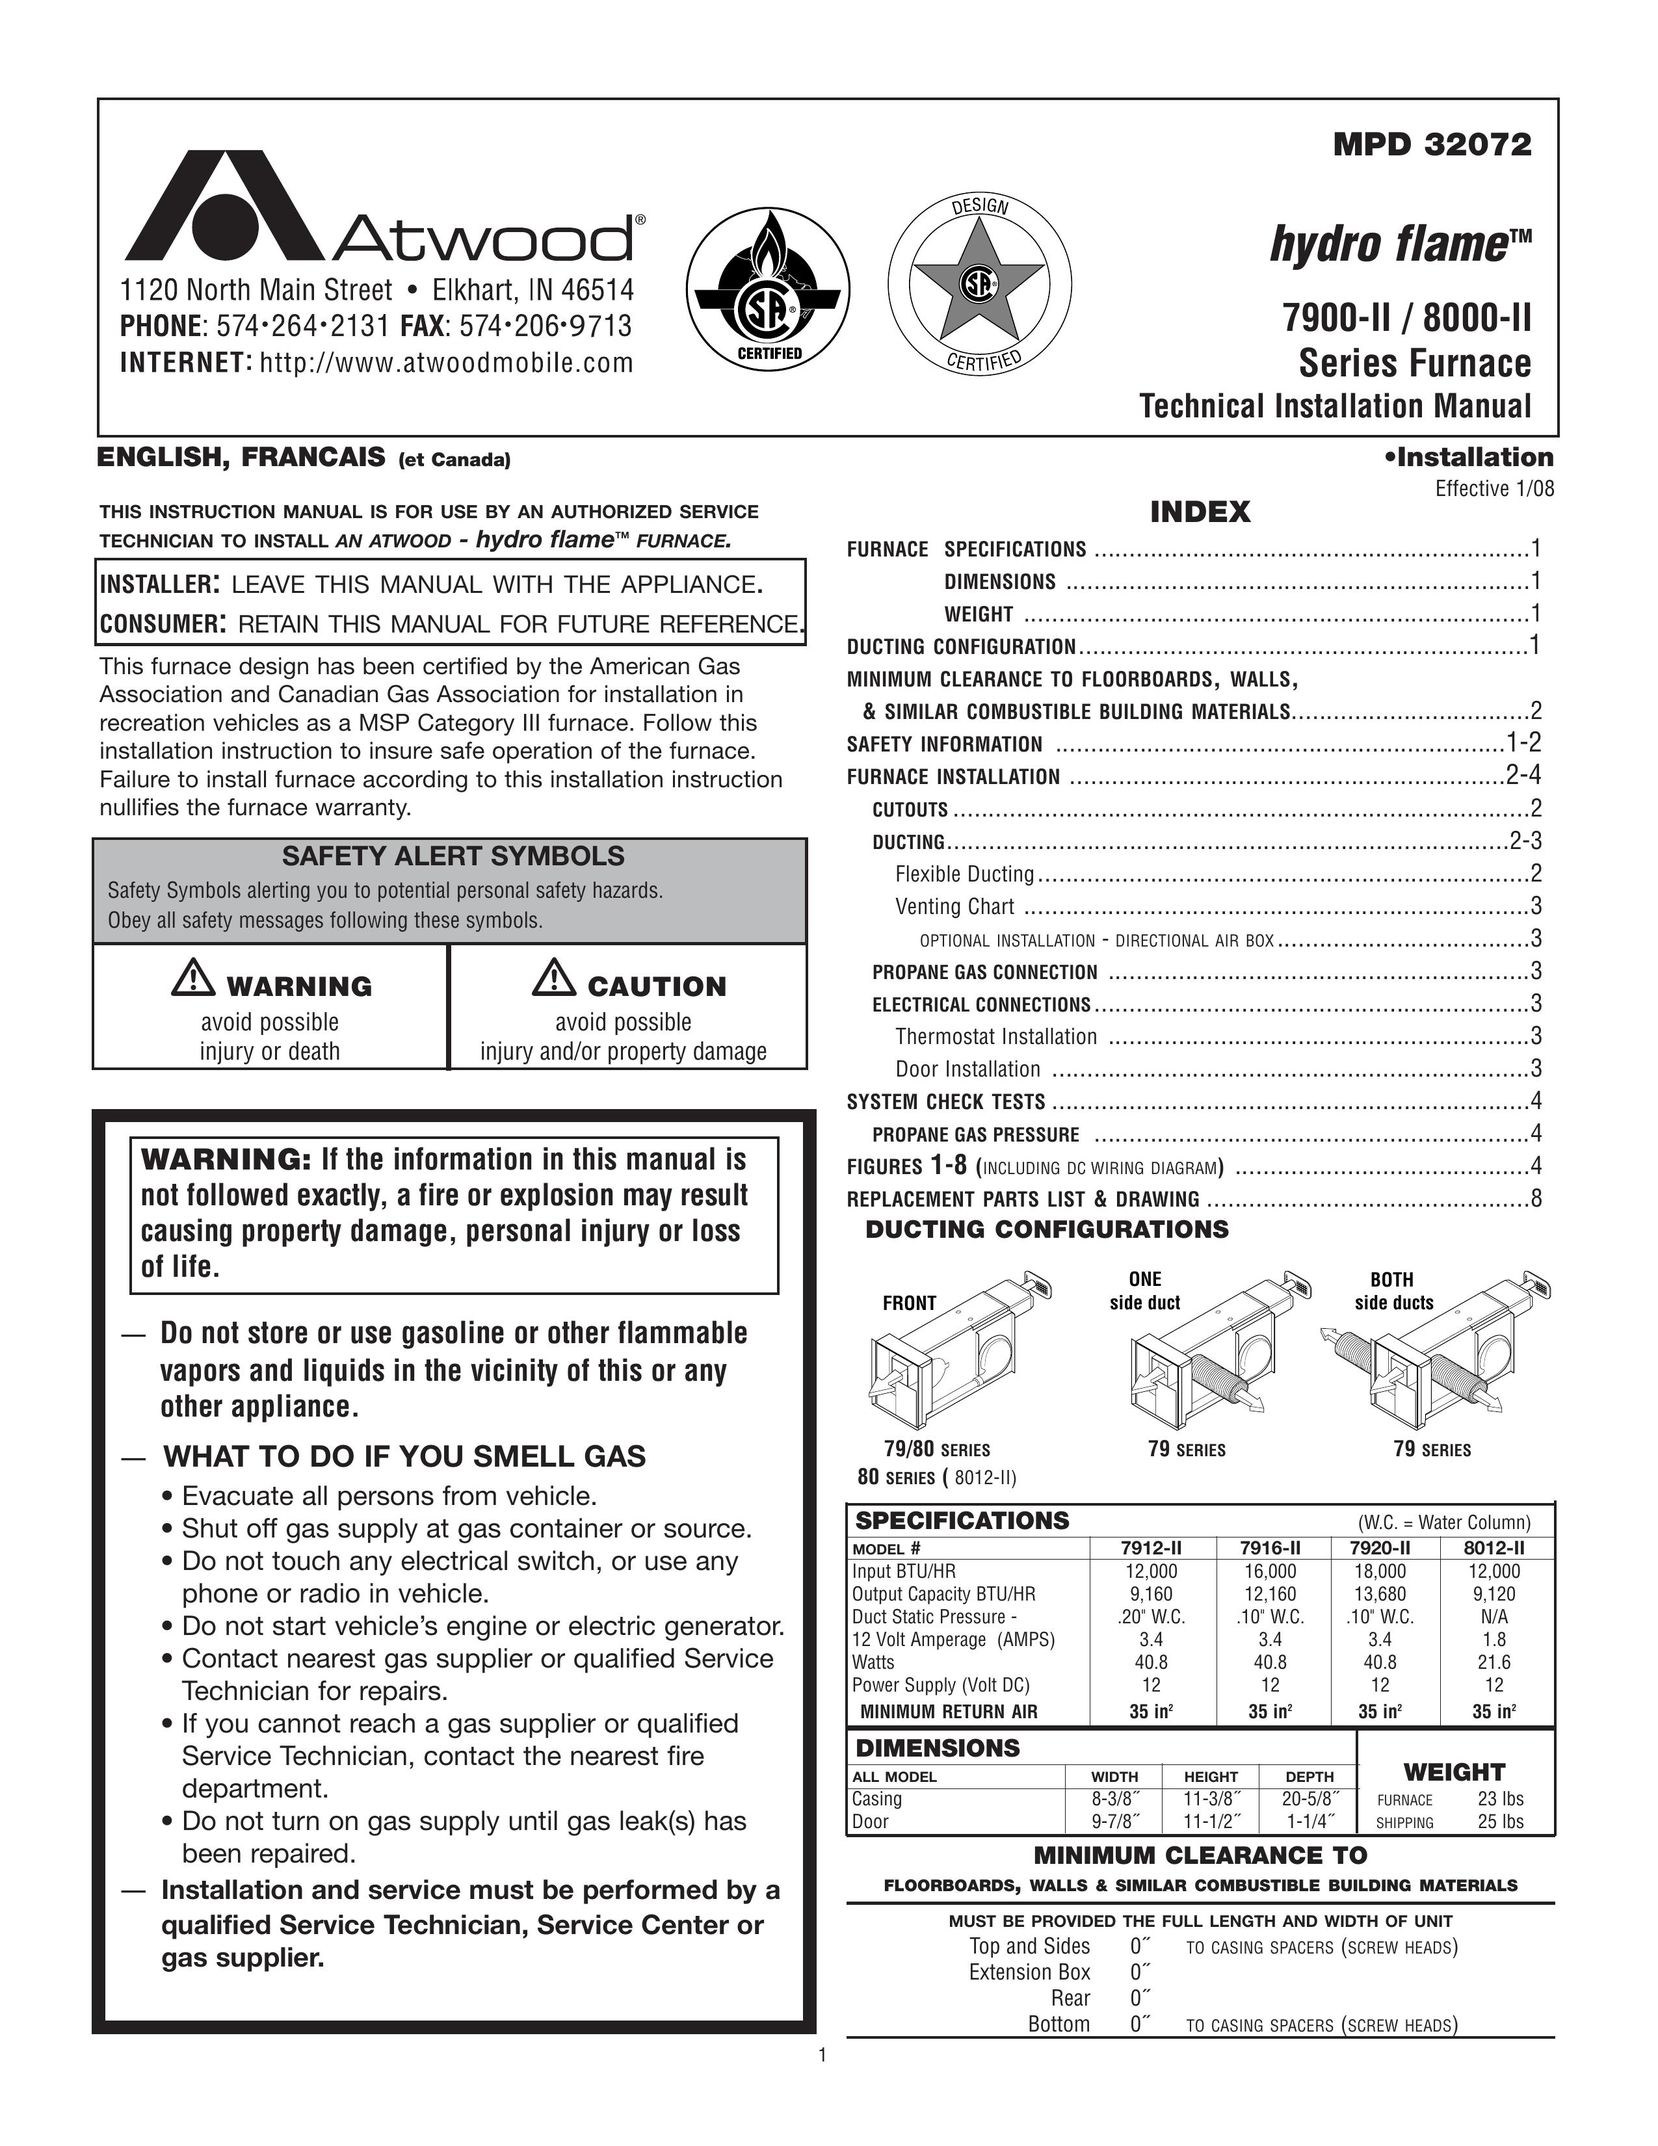 Atwood Mobile Products MPD 32072 Furnace User Manual